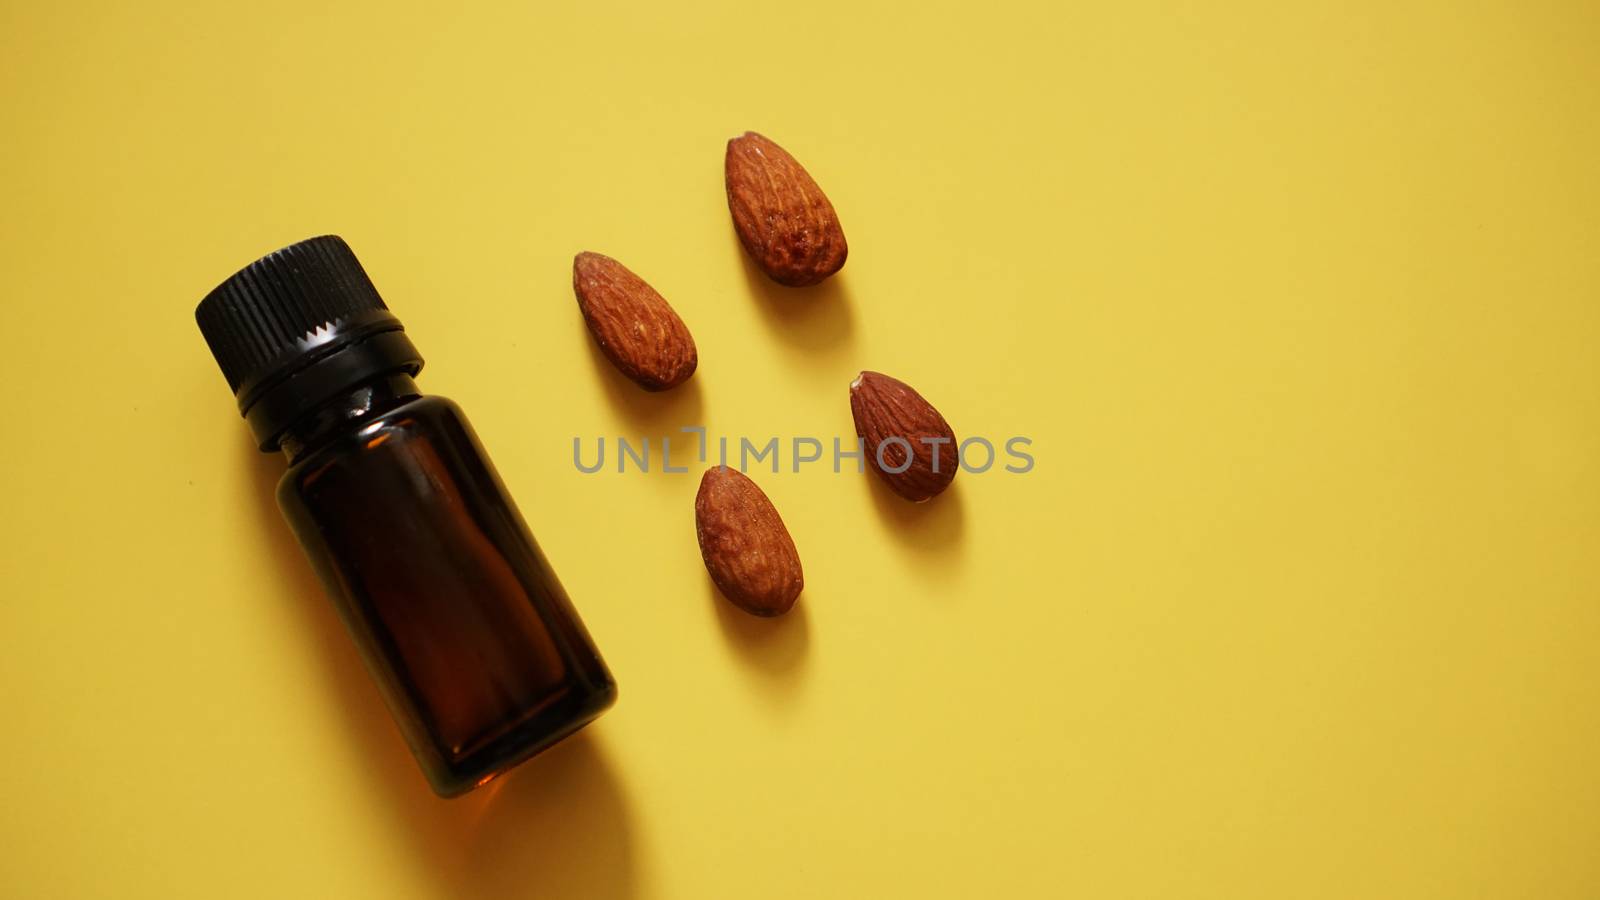 Bottle of almond oil and almonds on yellow background - Bottle and rows of nuts